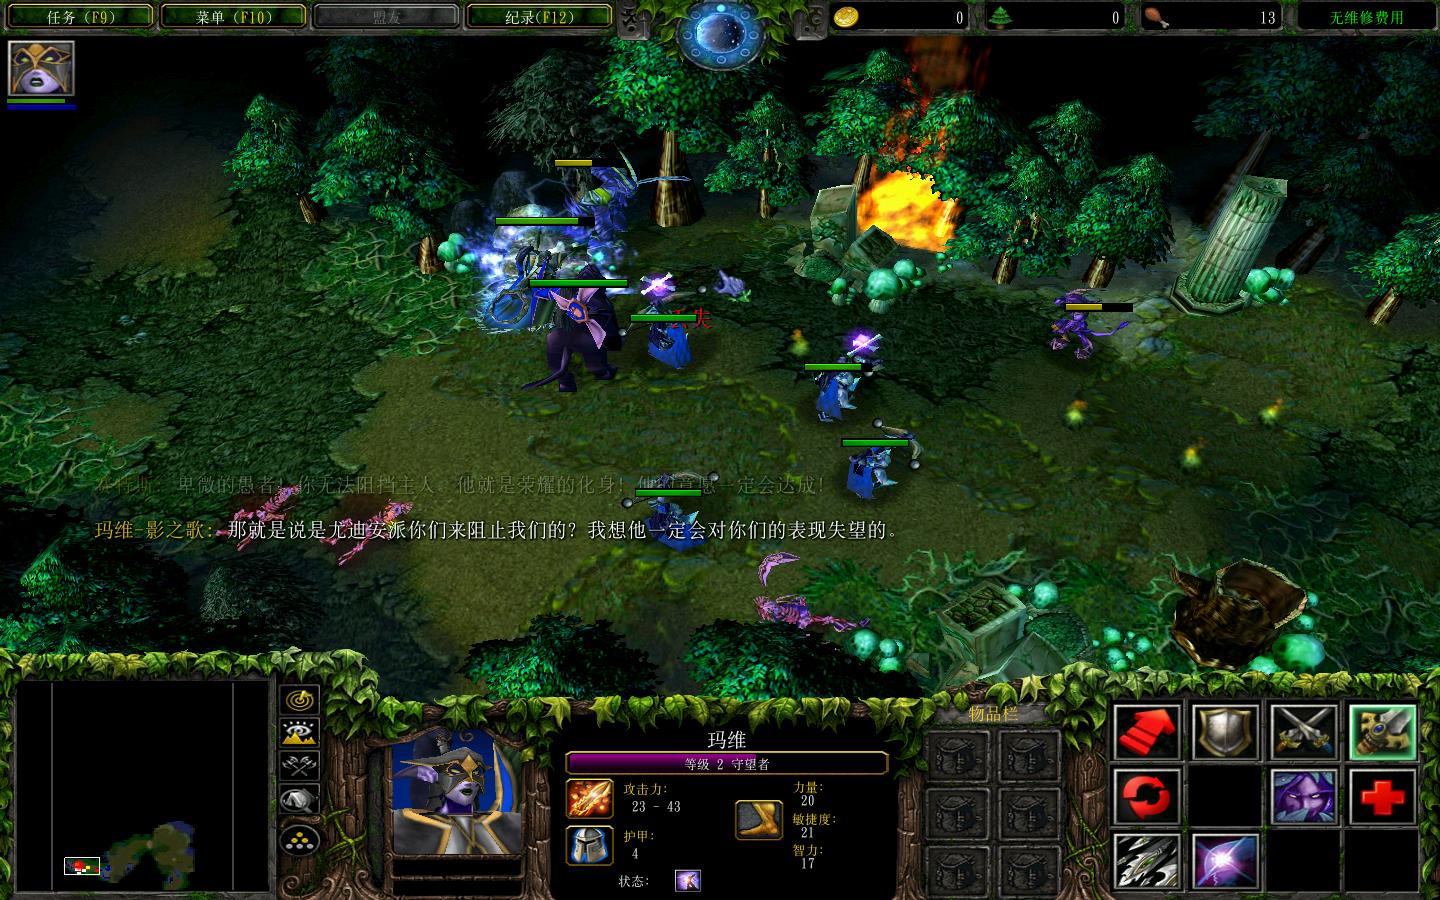 ħ3Warcraft III The Frozen Throne1.24-1.27Ӣ۵ v2.11޸